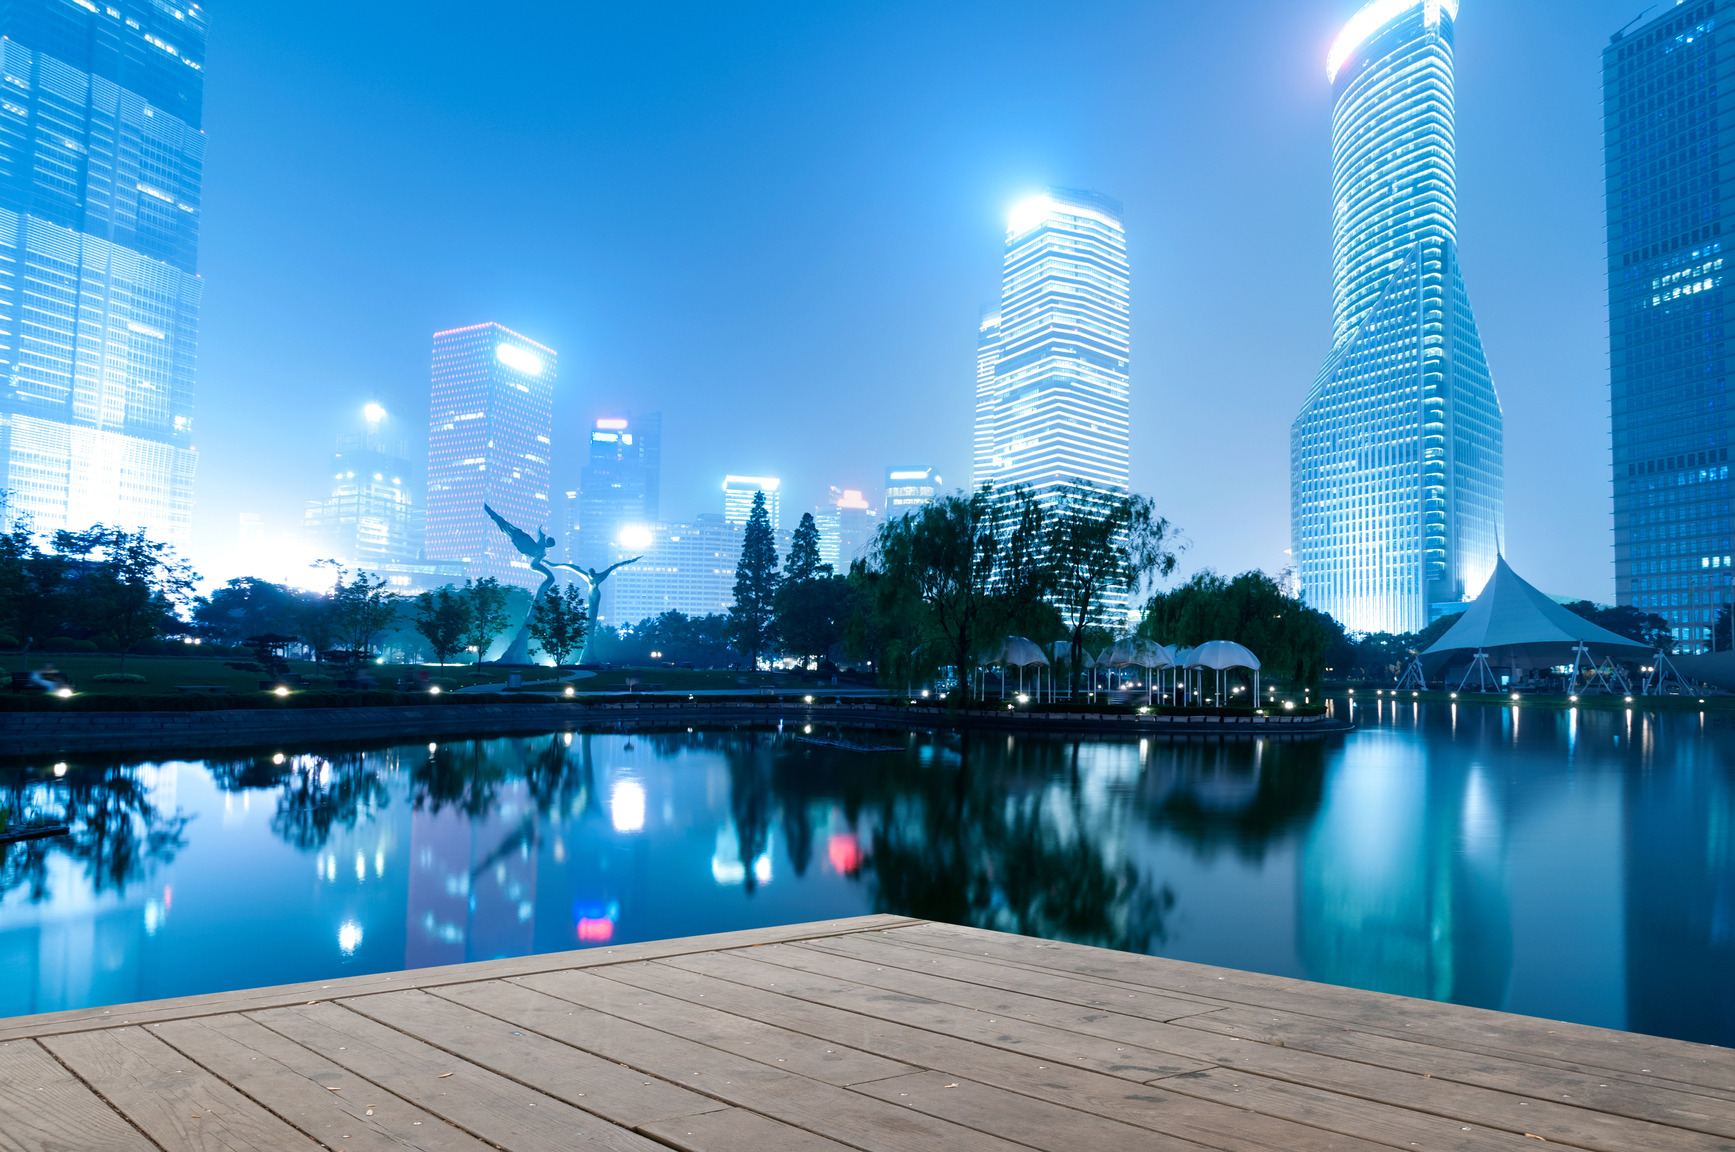 night scenes of shanghai financial center district